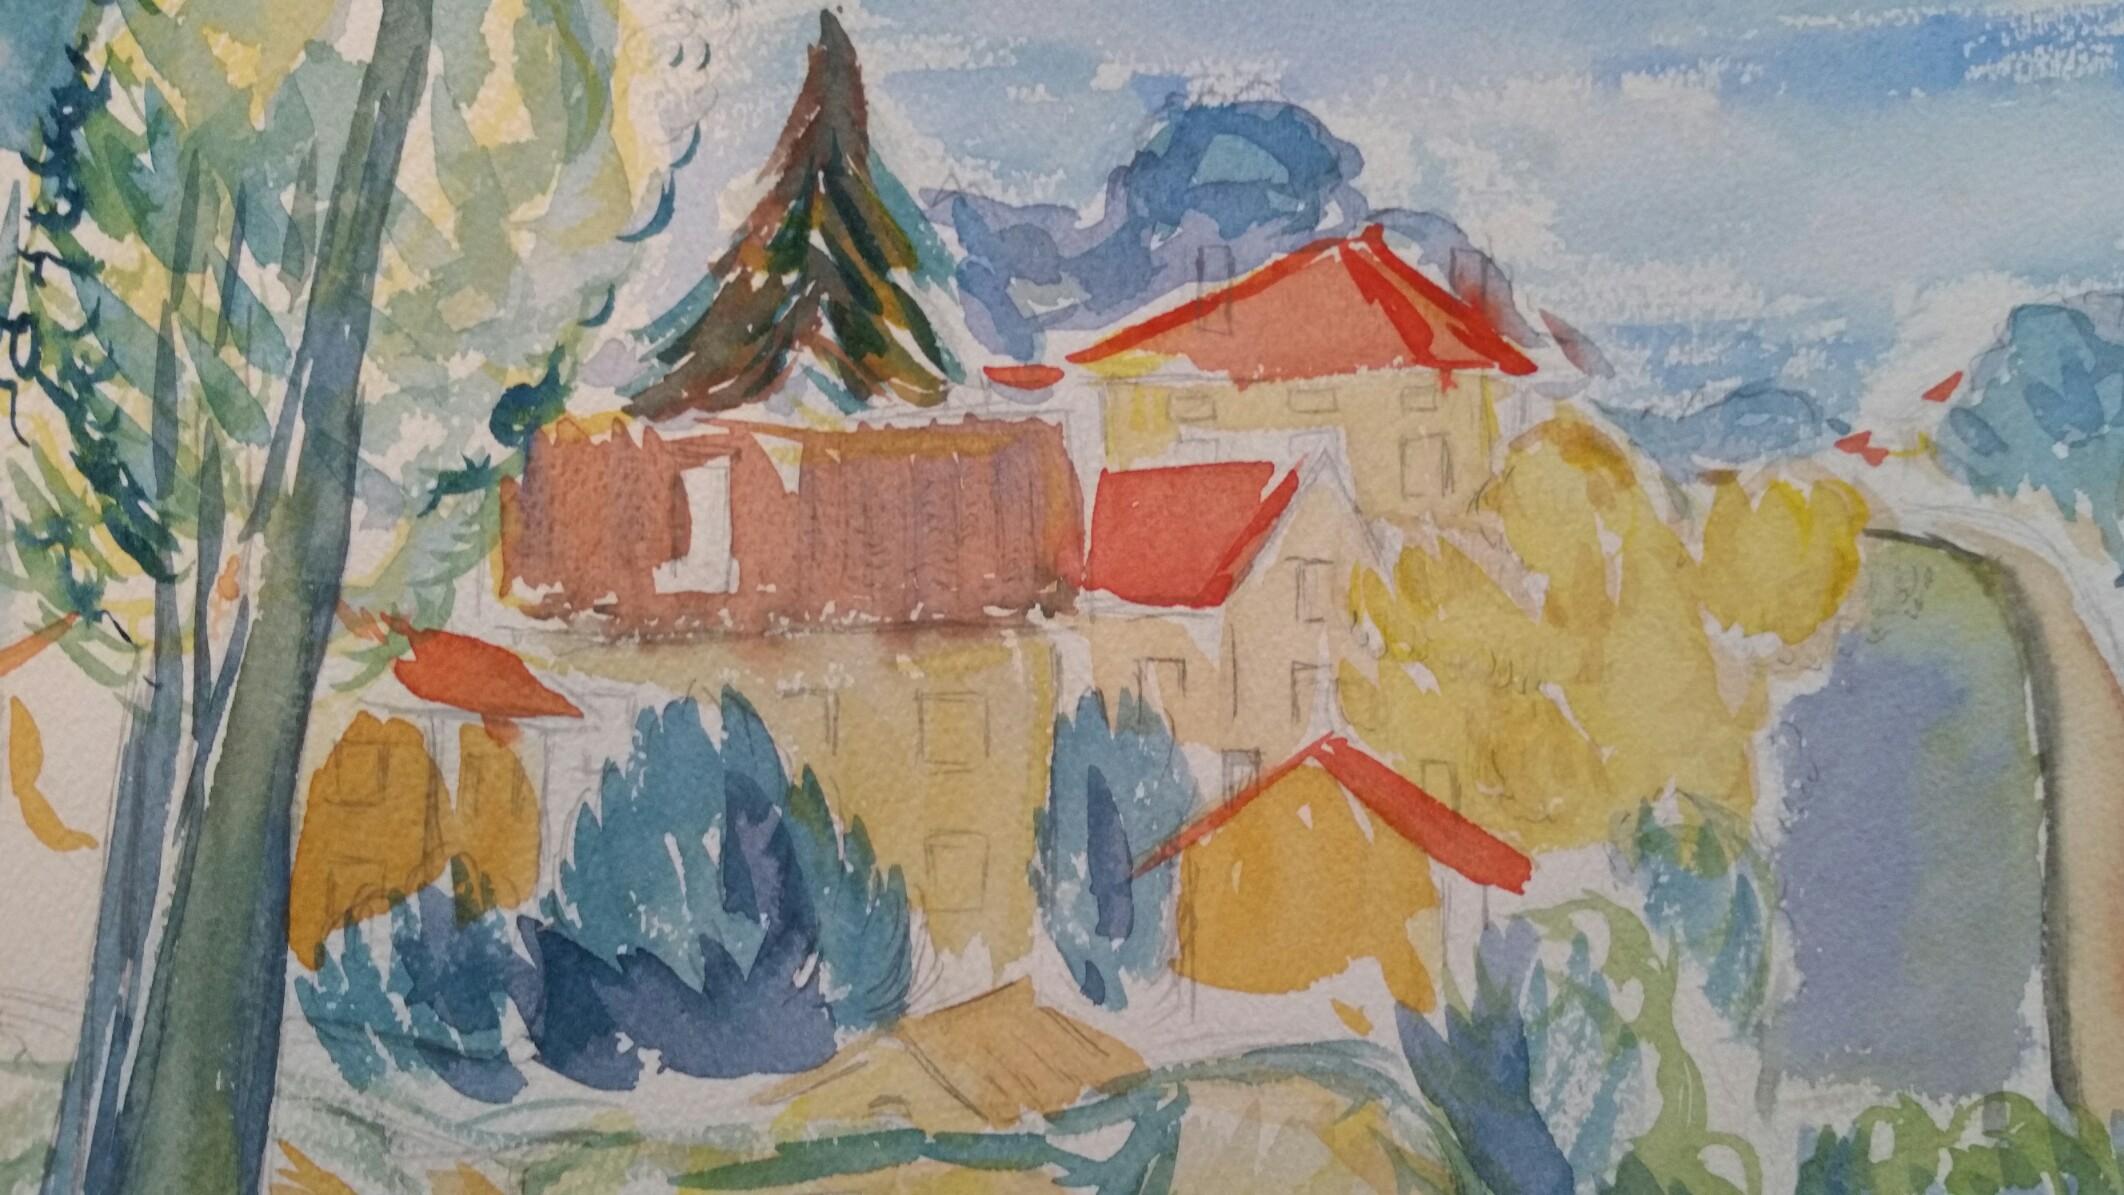 Provence Landscape, Hill Village Panorama
by Louis Bellon (French 1908-1998)
Initialled lower right, dated 43 (1943)
watercolour painting on paper, unframed
measurements: 9.75 x 14.5 inches

provenance: private collection of the artists work,